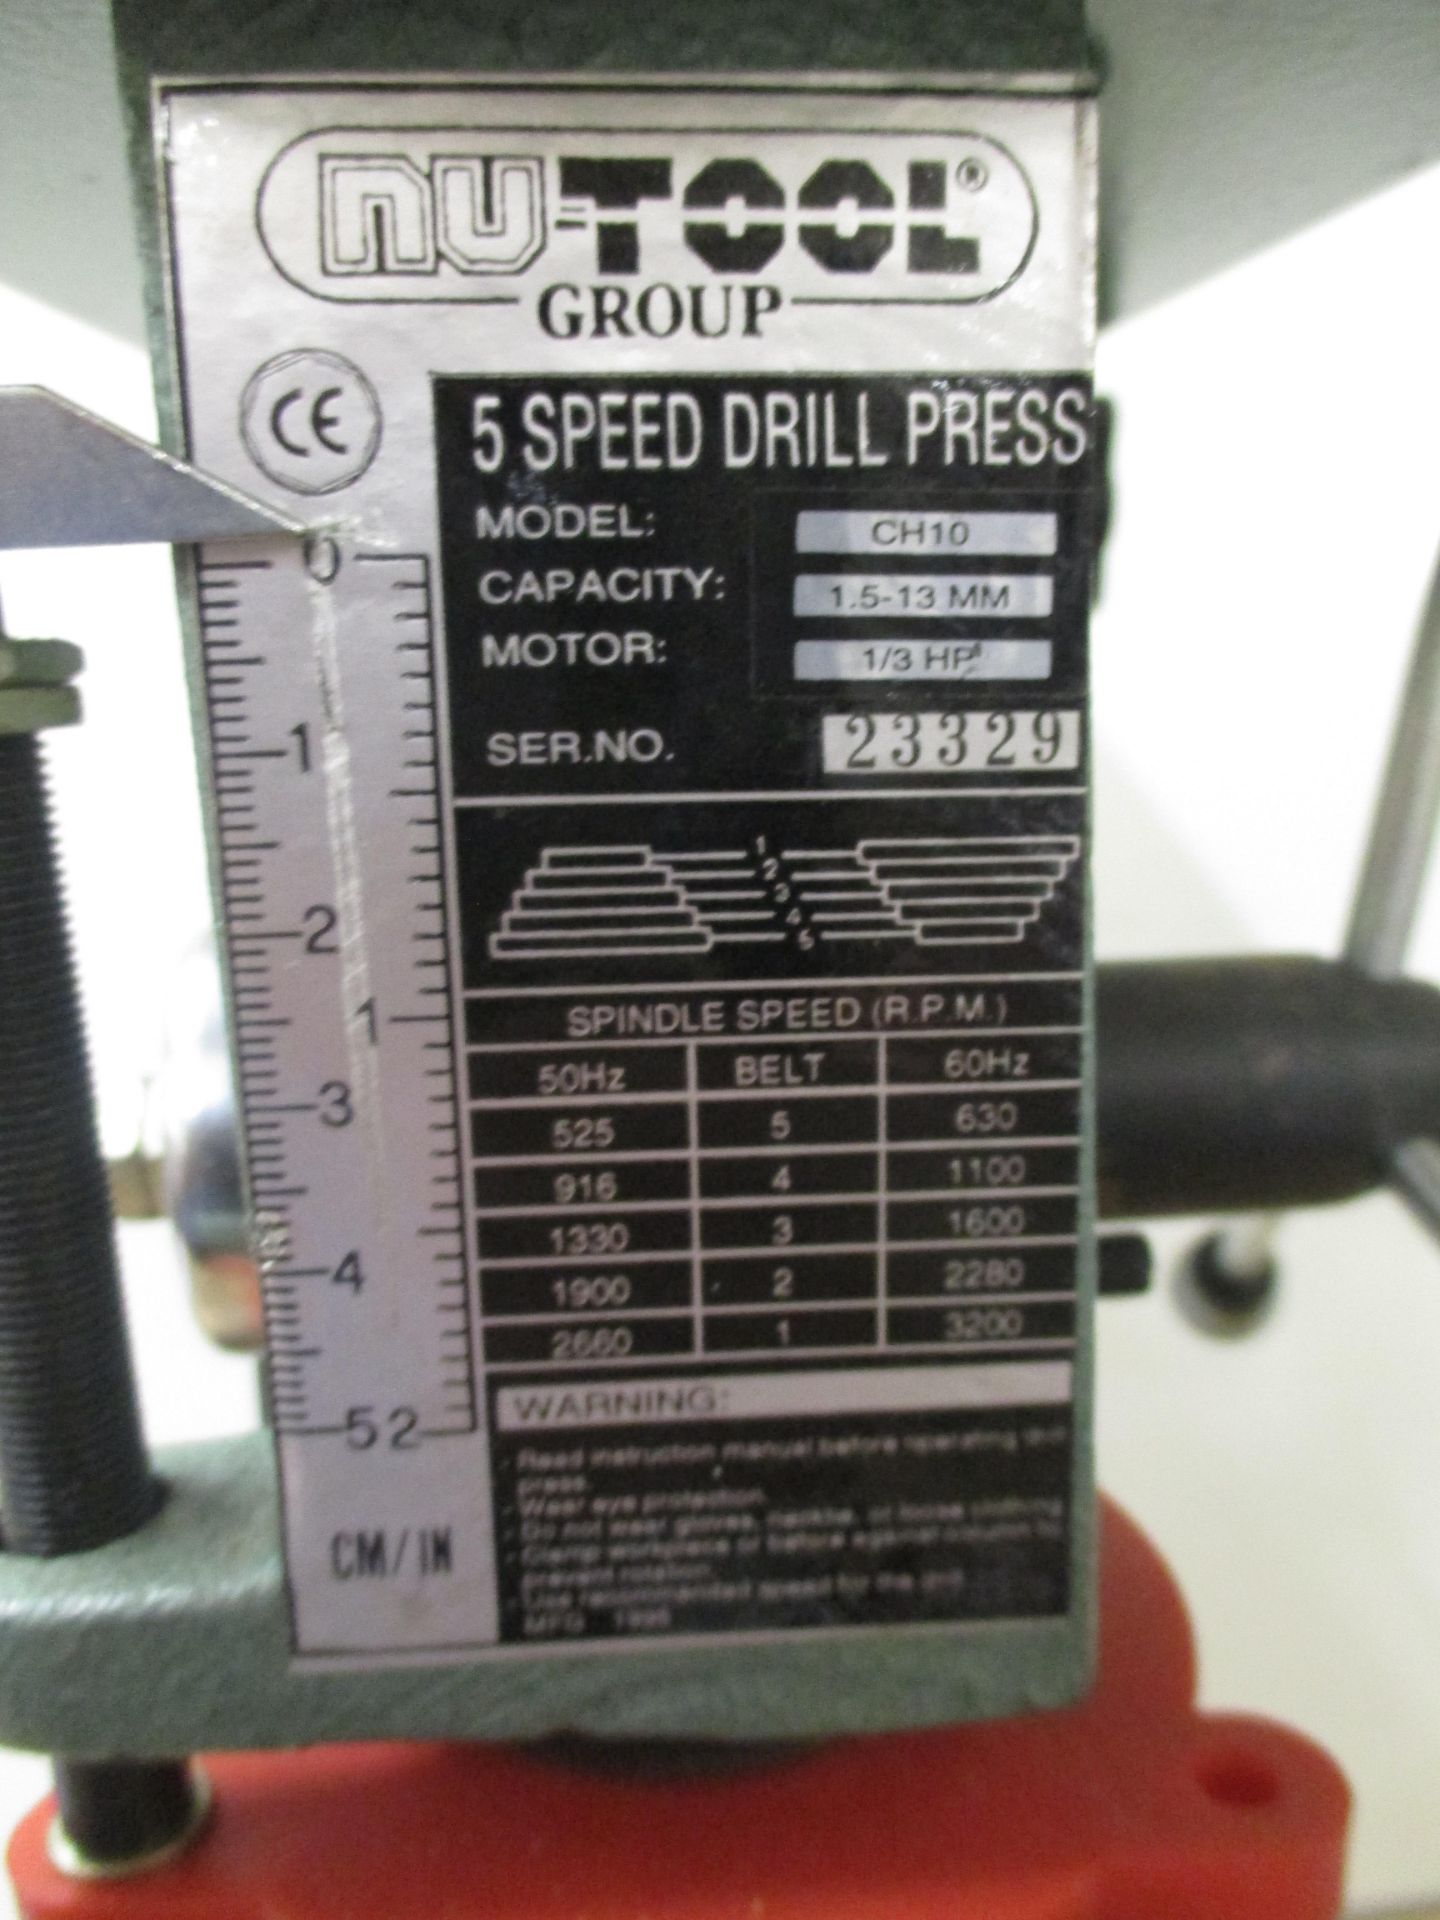 NU-TOOL 5 SPEED DRILL PRESS. HAD VERY LITTLE USE - Image 4 of 5